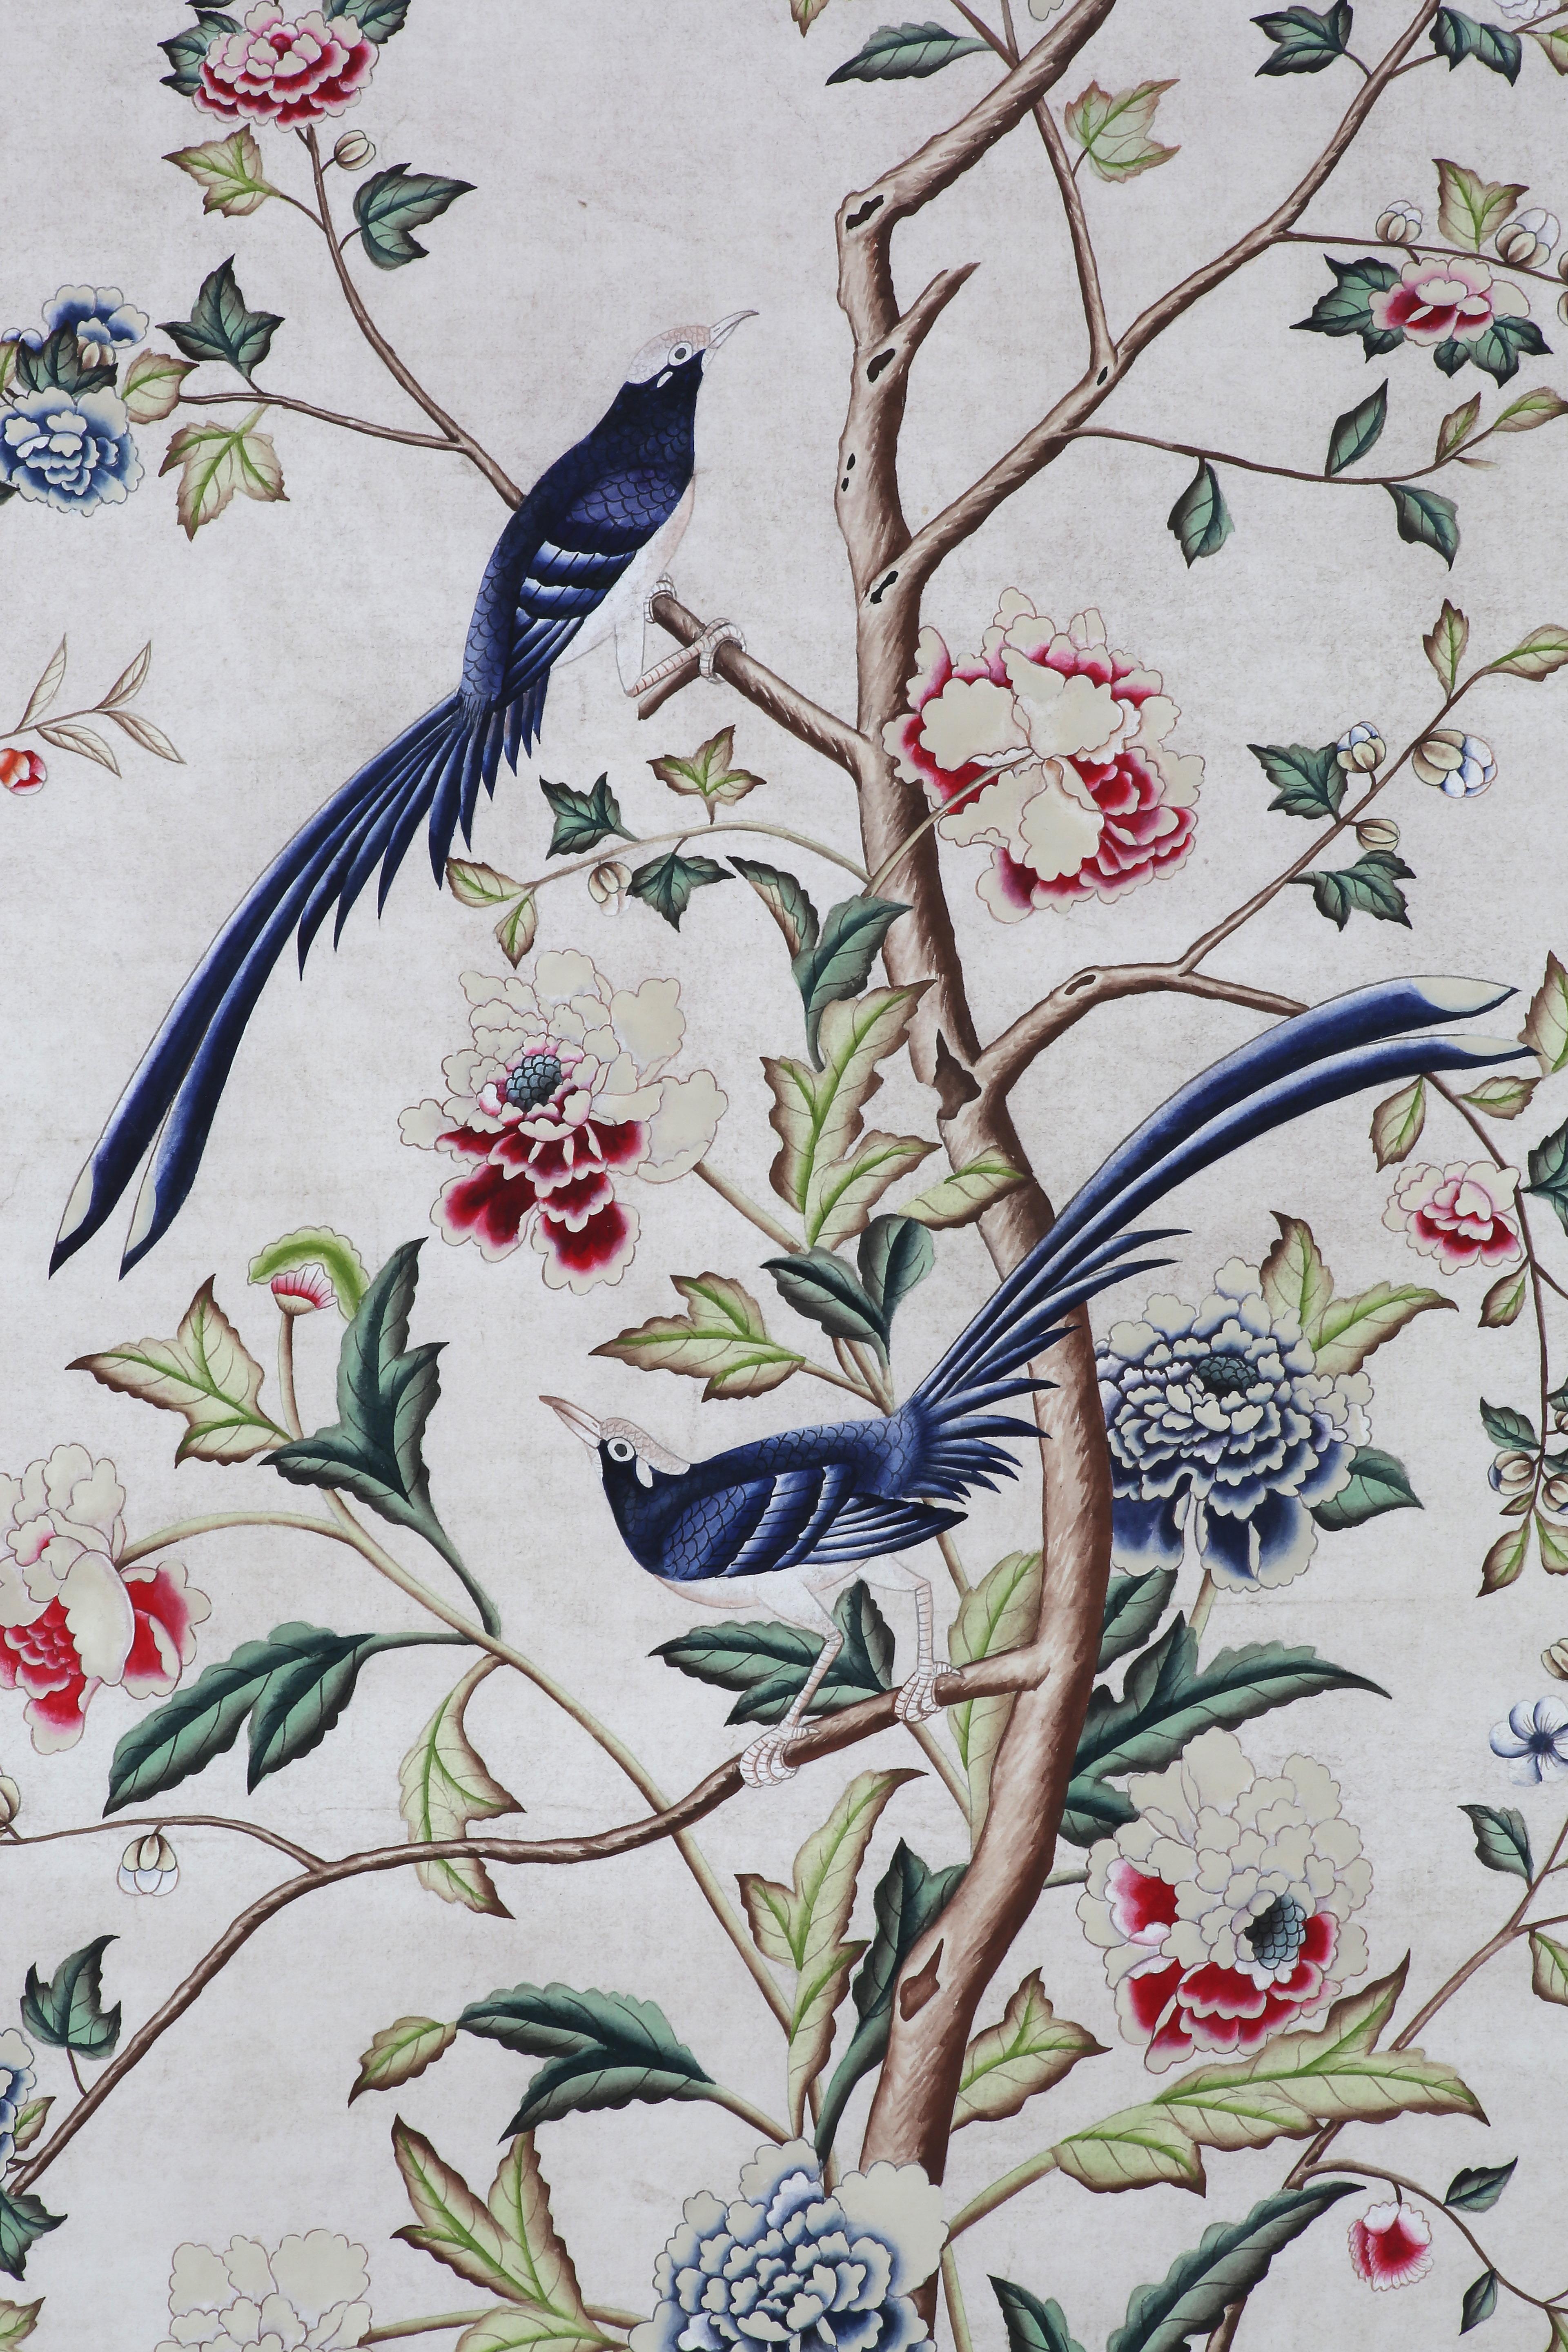 Contemporary Chinoiserie Hand Painted Wallpaper Panels of Birds and Blossoms